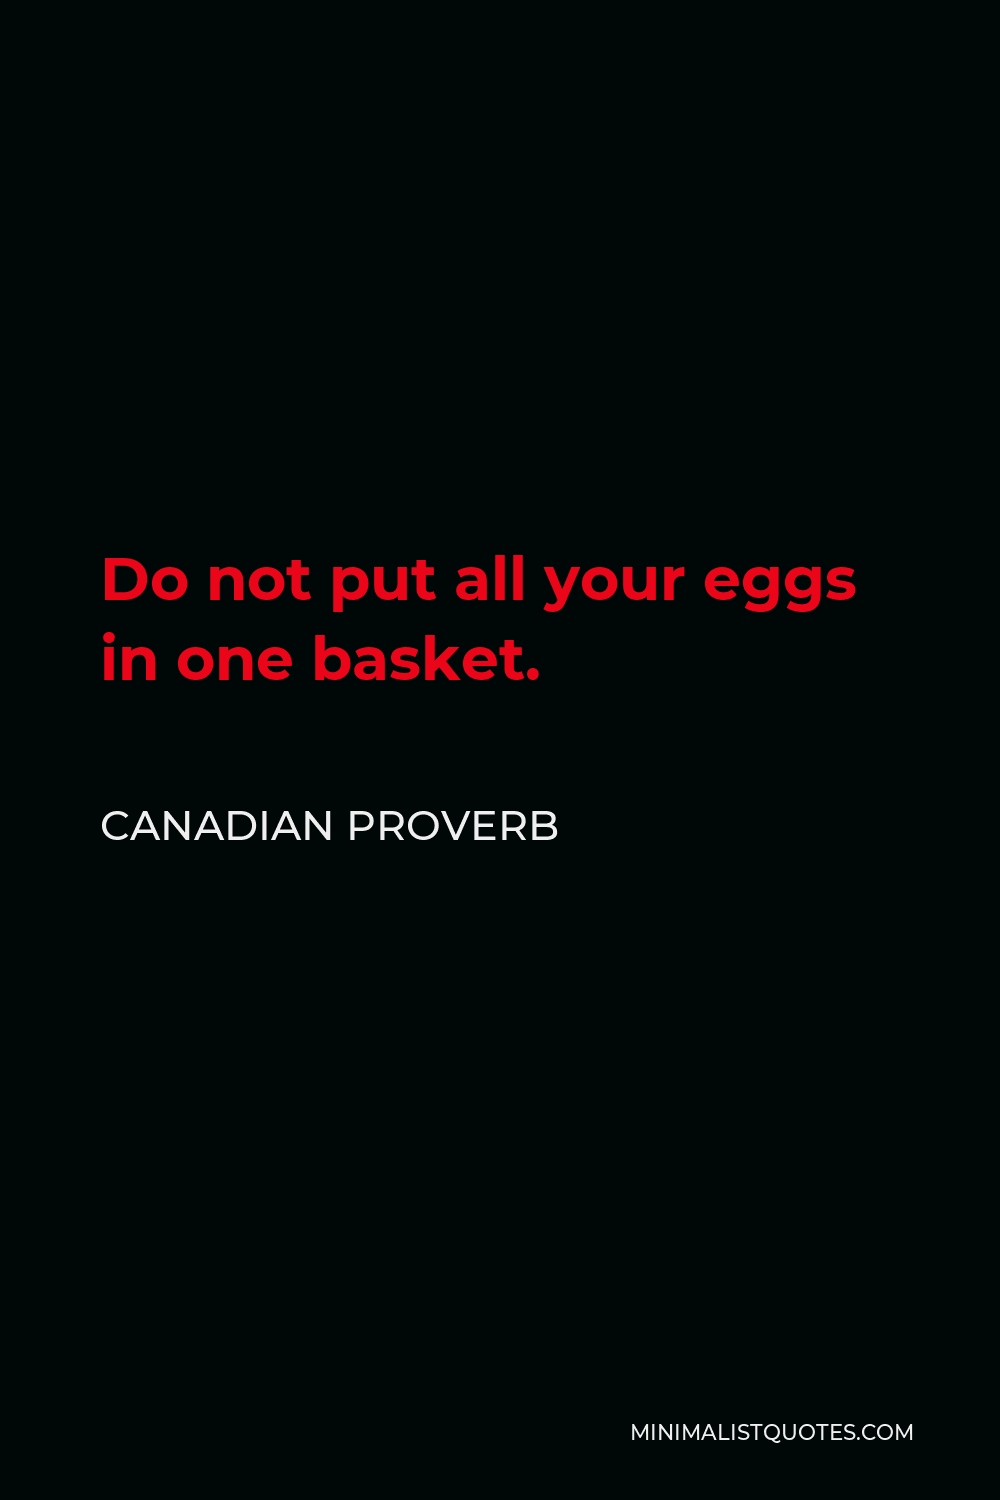 Canadian Proverb Quote - Do not put all your eggs in one basket.